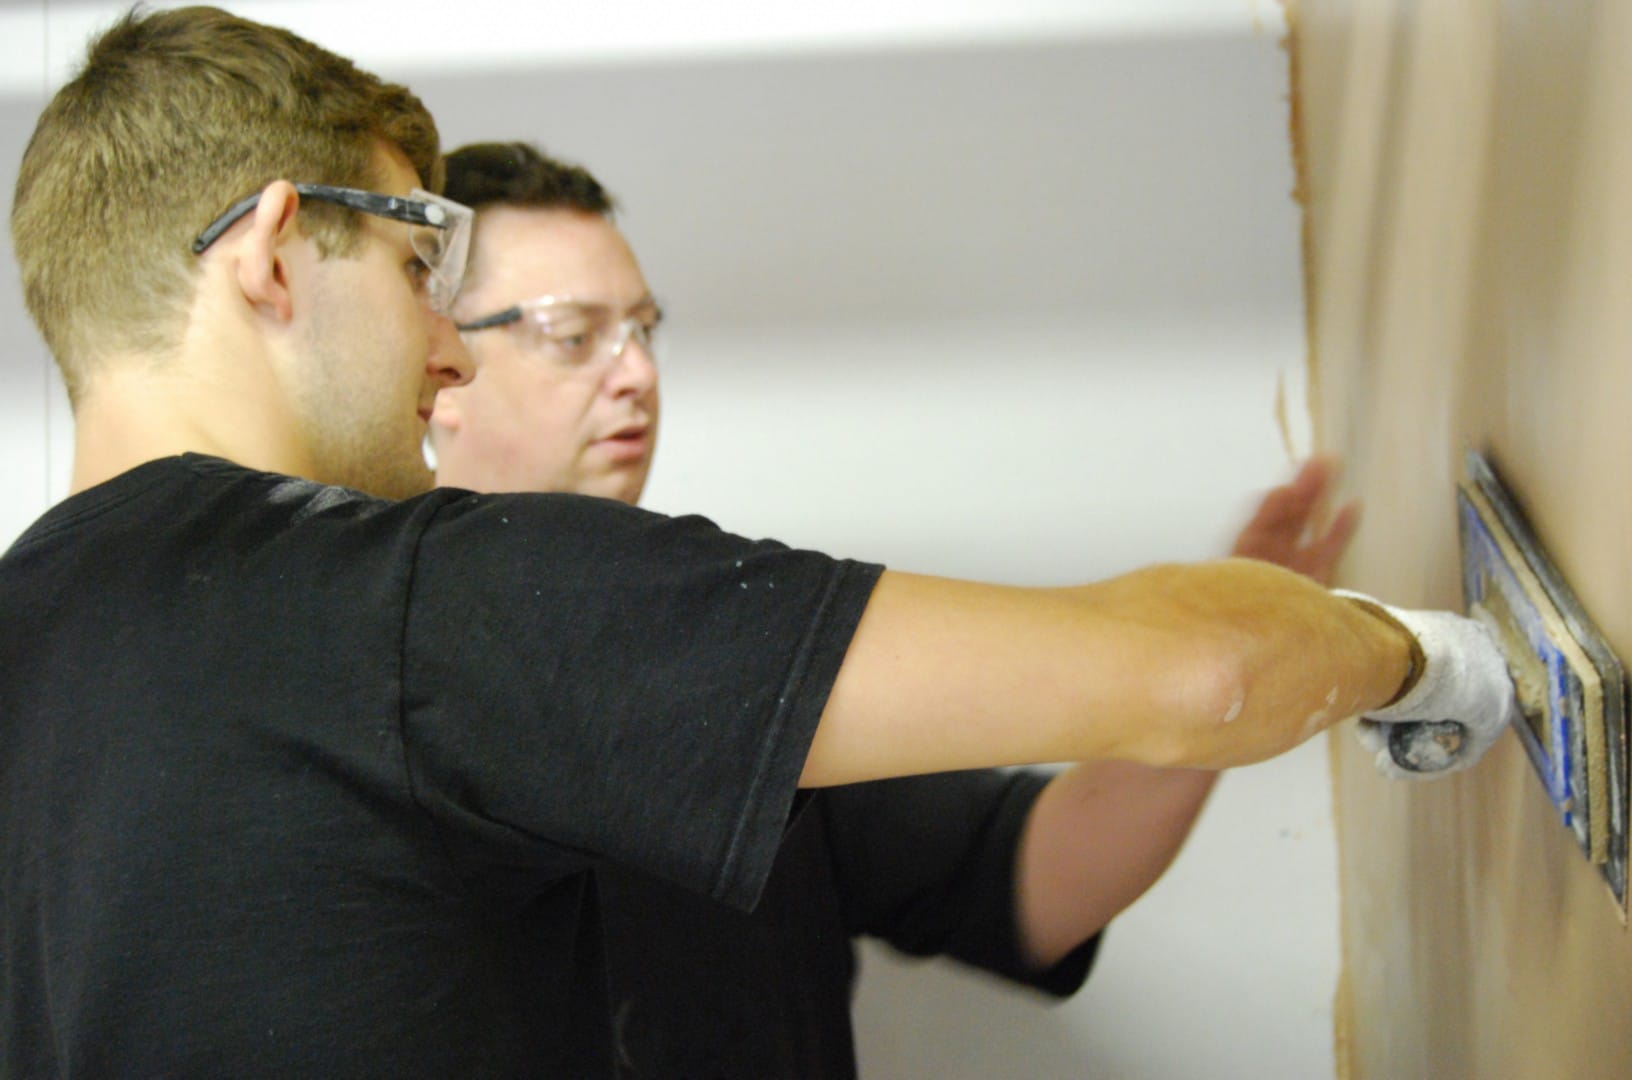 British Gypsum launches Green Deal courses